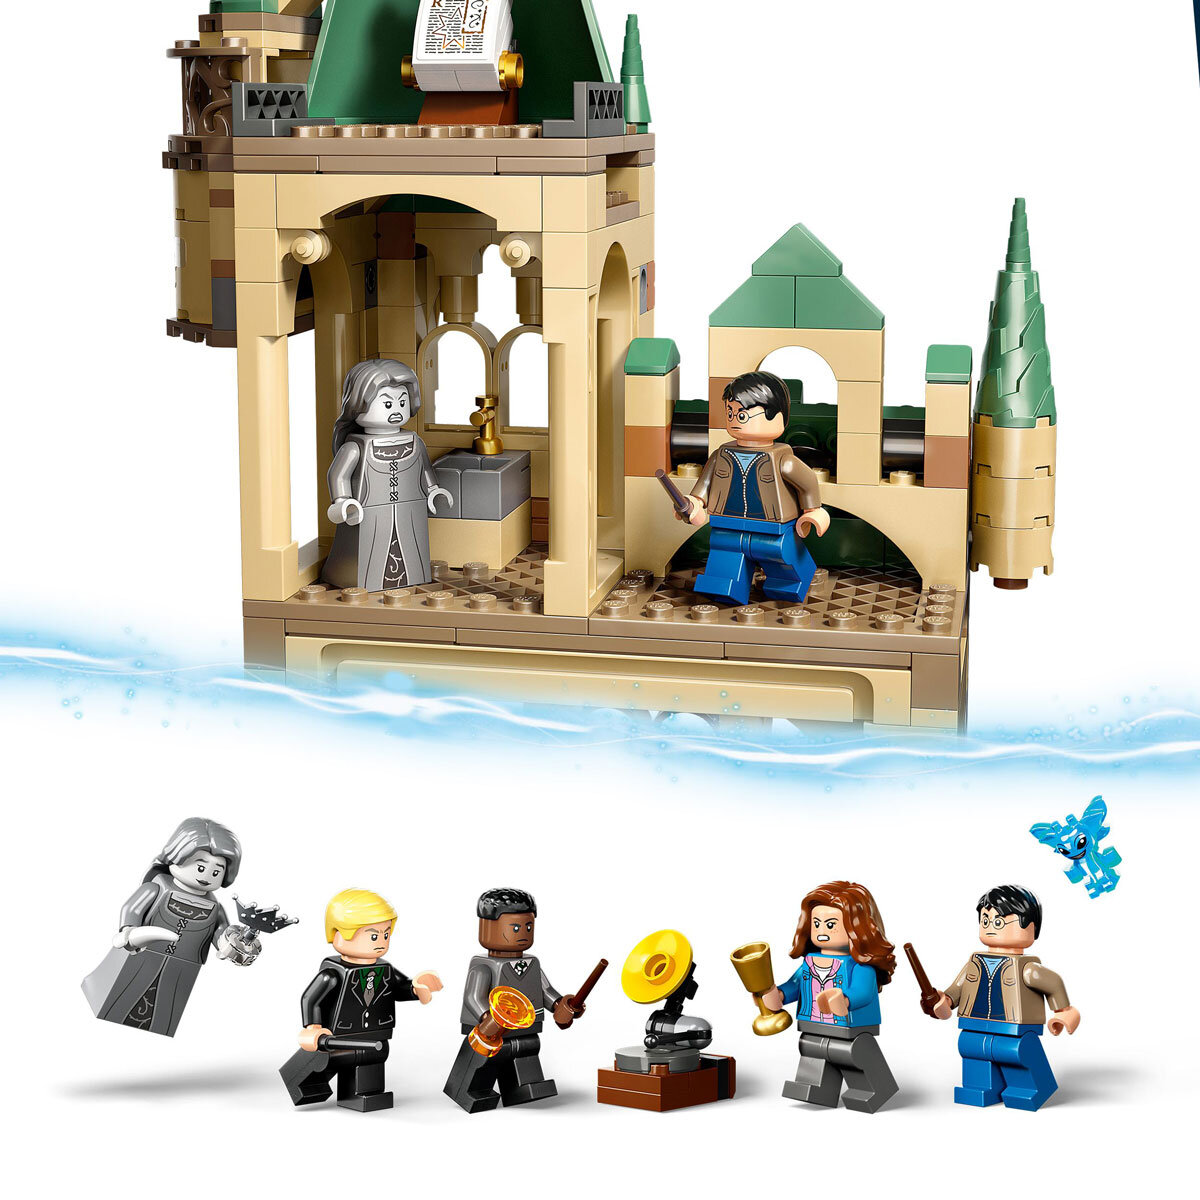 Buy LEGO Hogwarts: Room of Requirement Feature Image at Costco.co.uk